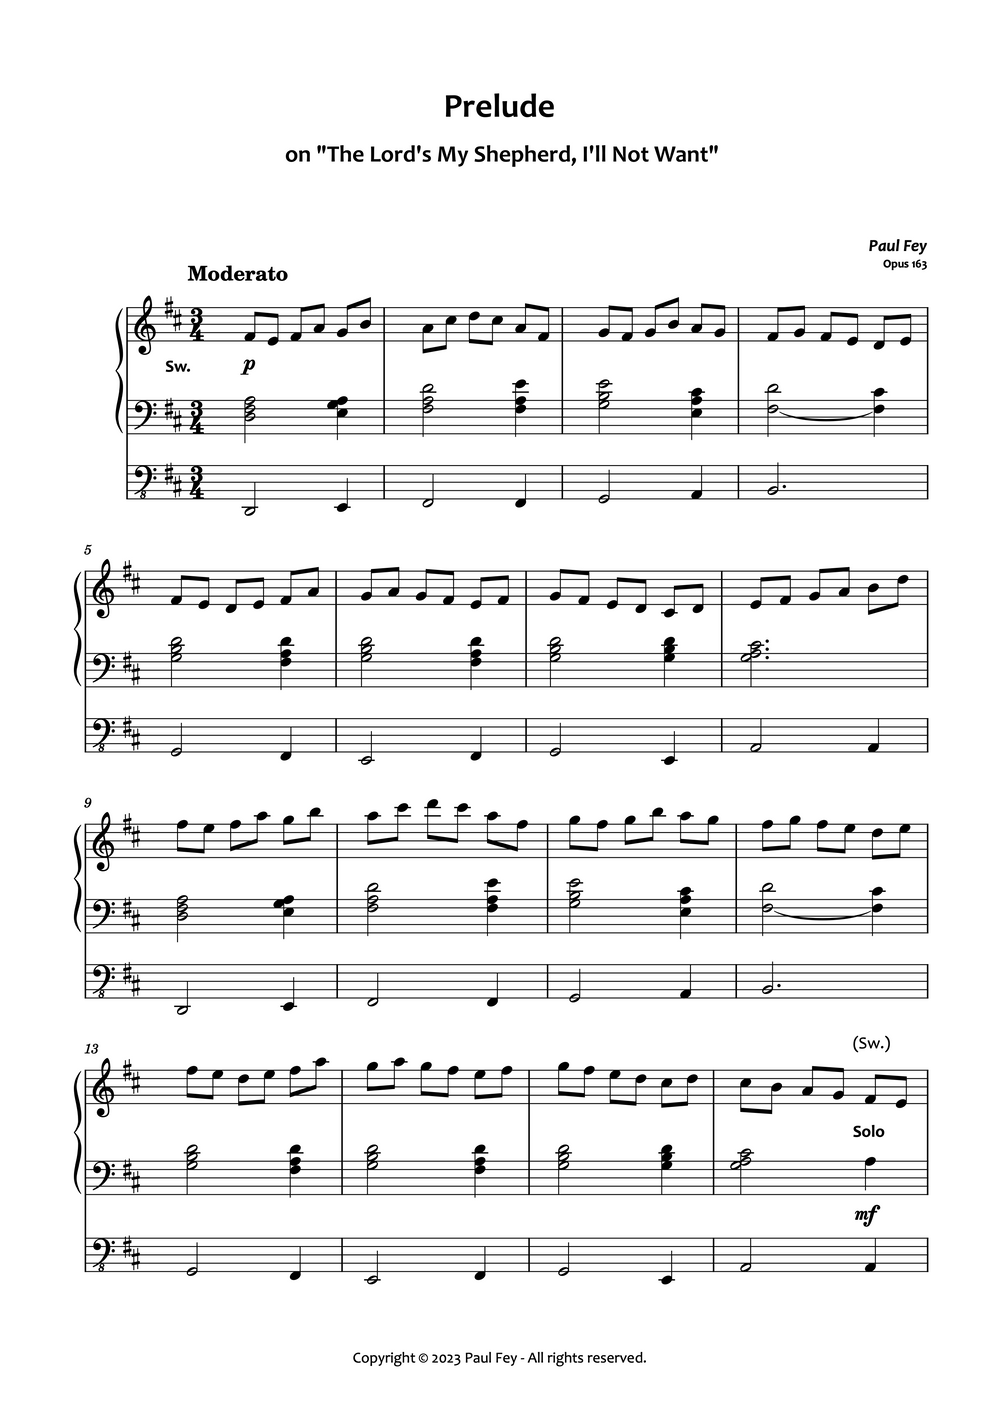 Prelude on 'The Lord's My Shepherd' (Sheet Music) - Music for Organ PDF Download